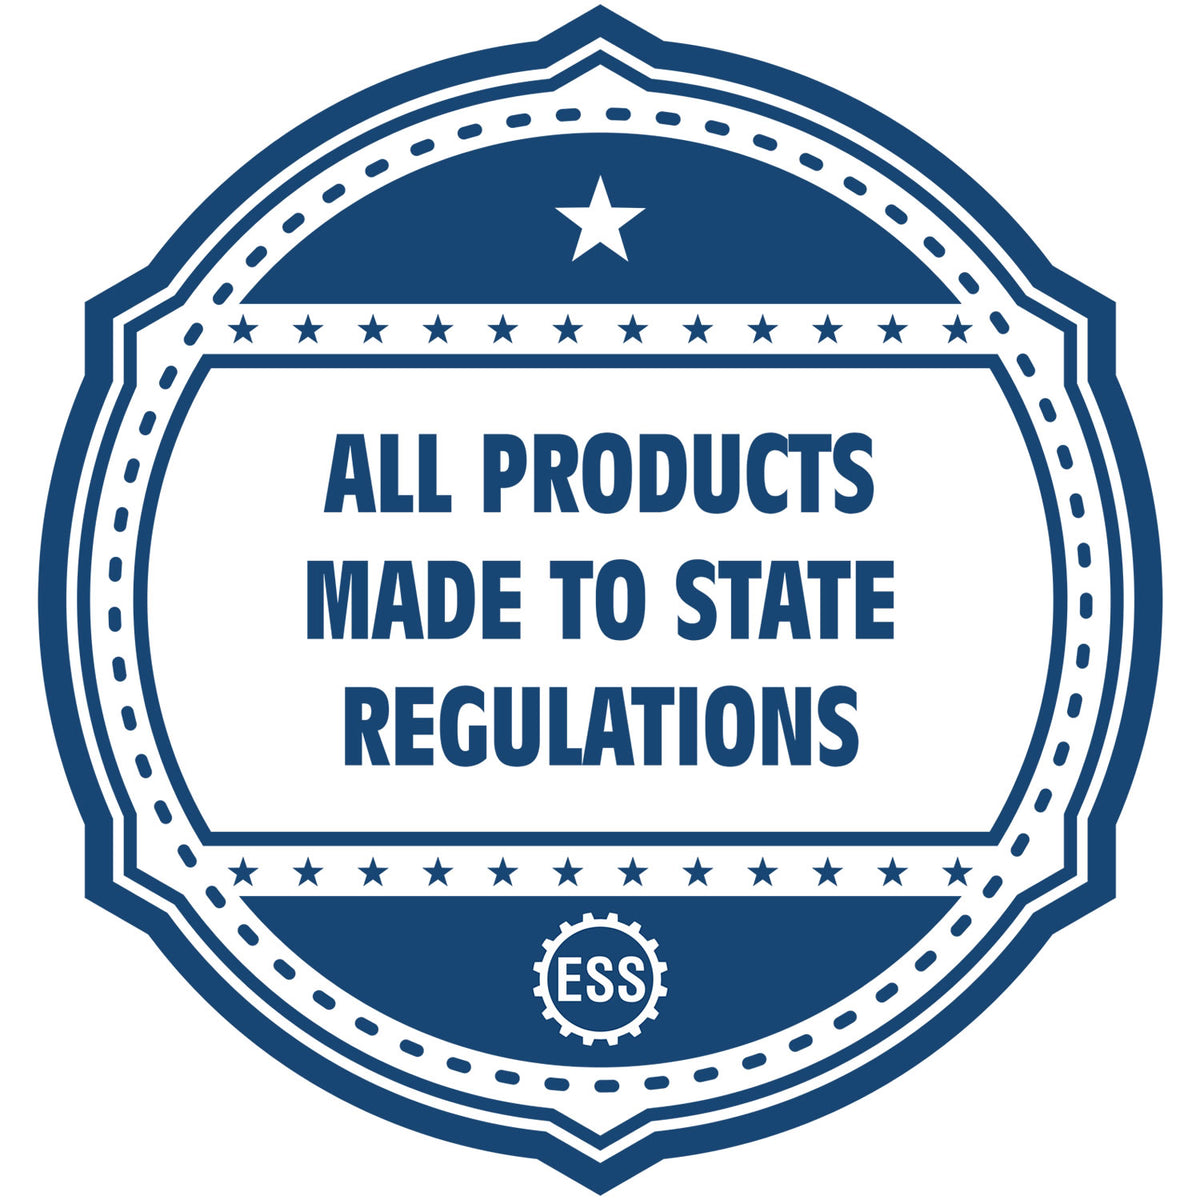 An icon or badge element for the Slim Pre-Inked New Jersey Land Surveyor Seal Stamp showing that this product is made in compliance with state regulations.